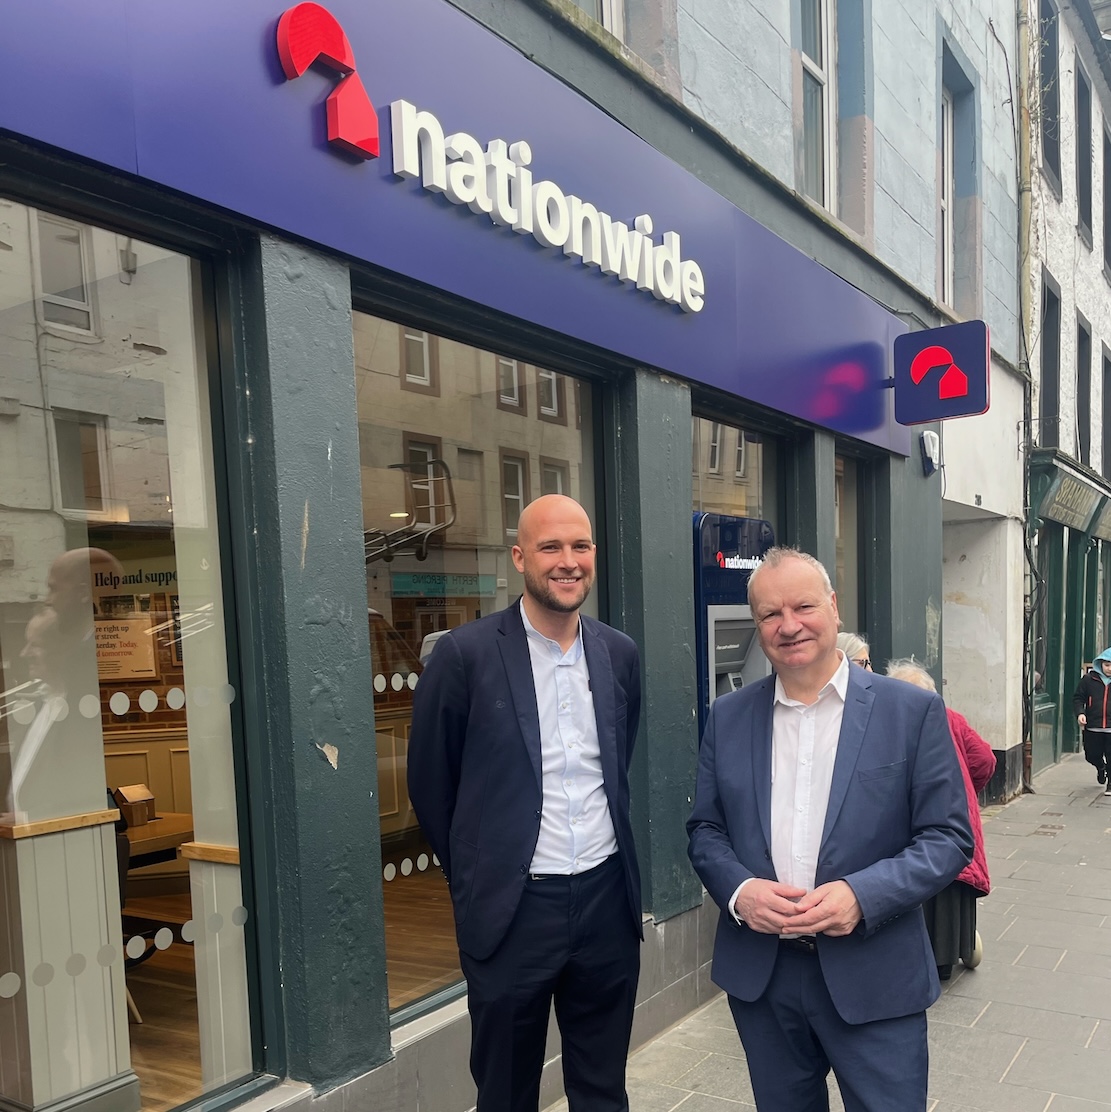 Nationwide celebrates 60 years on Perth's high street